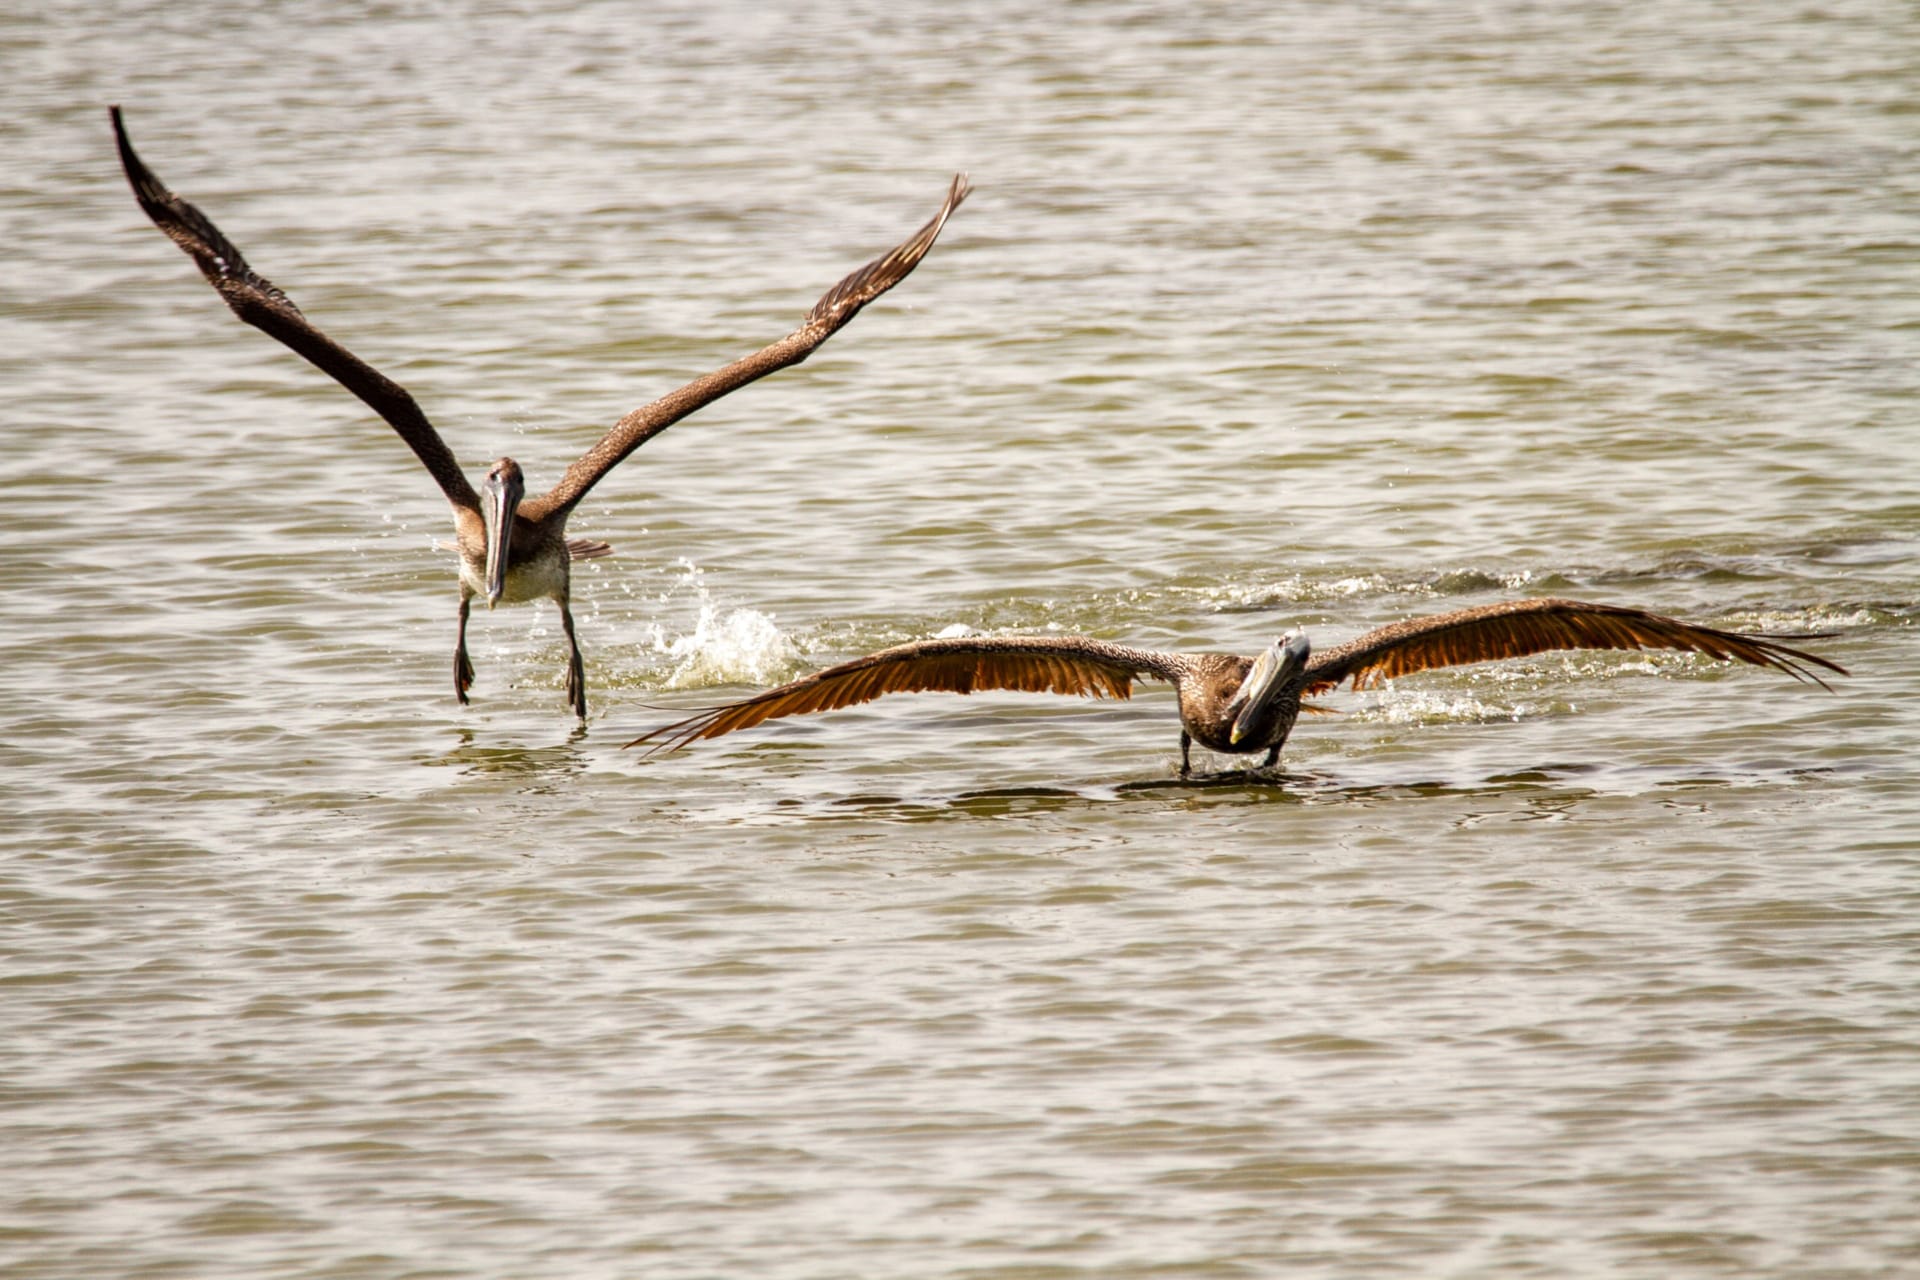 two pelicans starting their flight from water